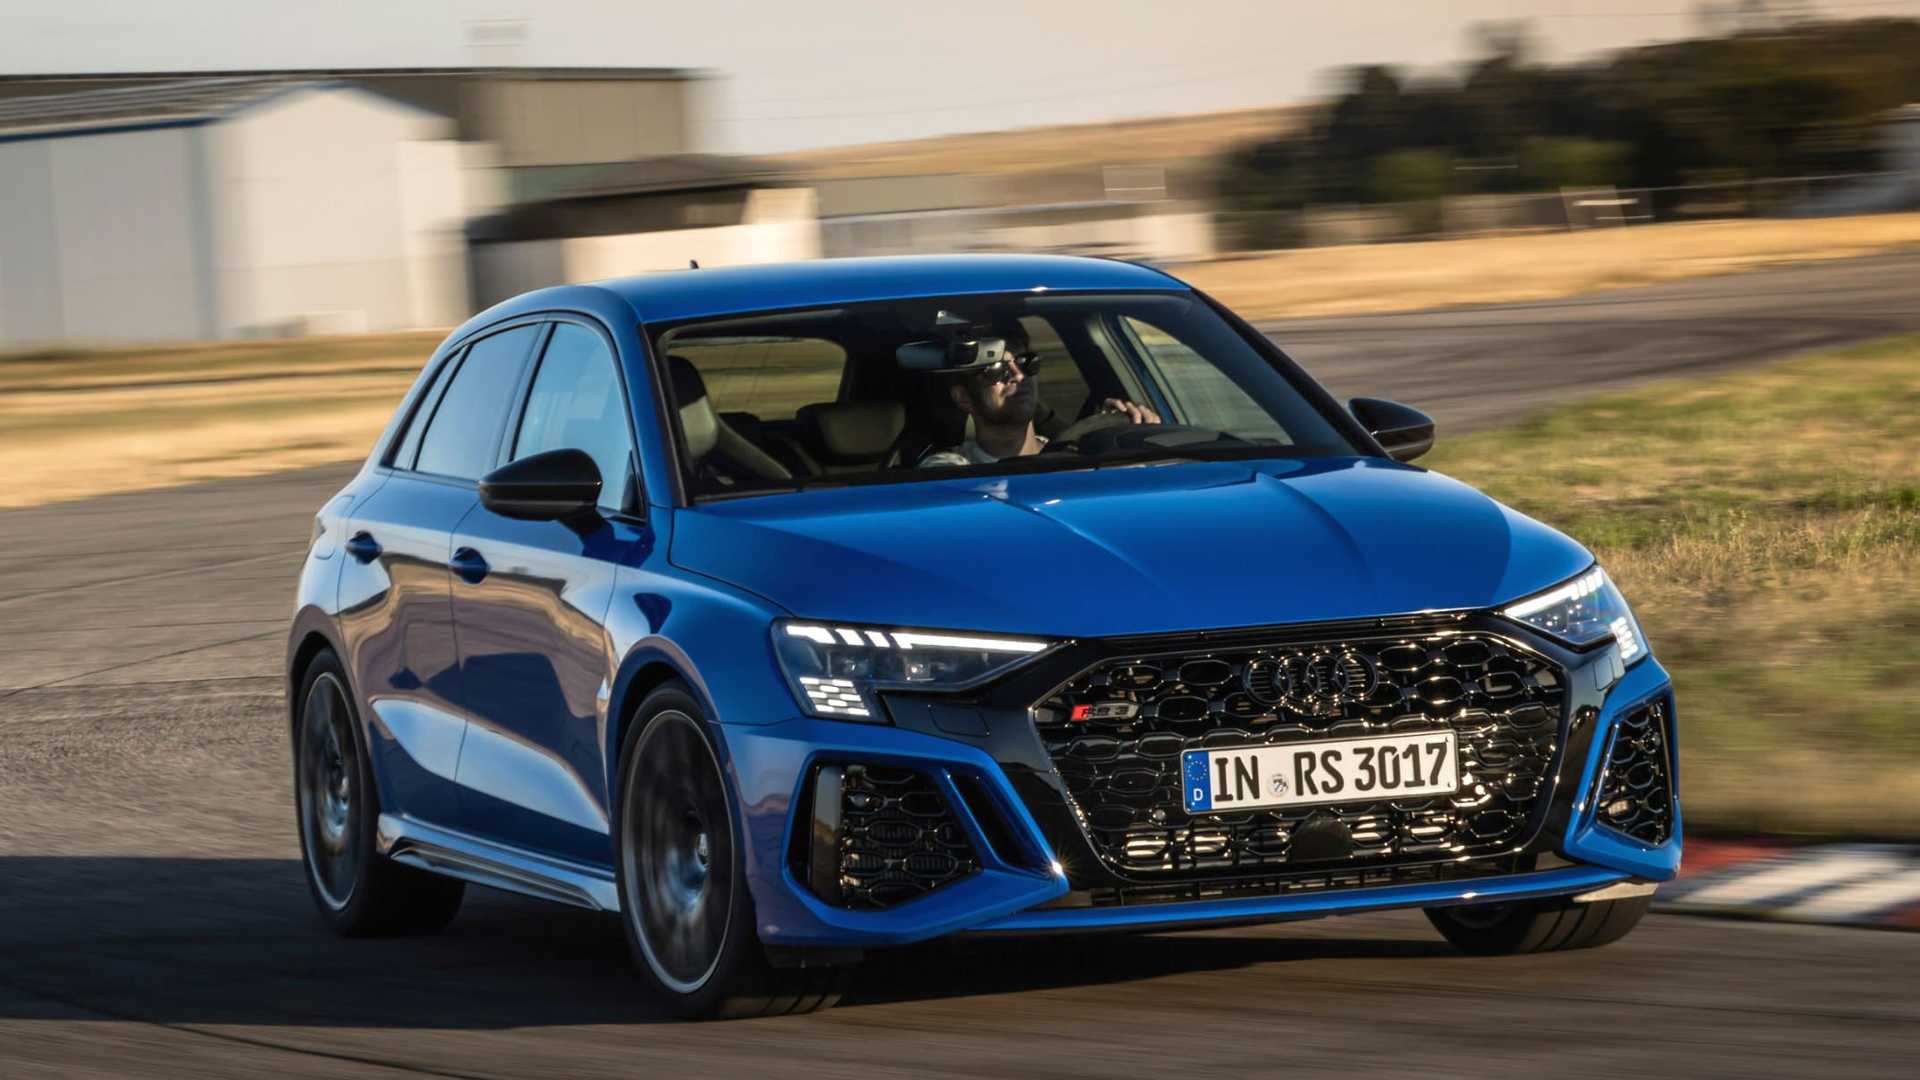 2023 Audi RS3 Performance Edition Debuts With 407 HP, Goes 186 MPH